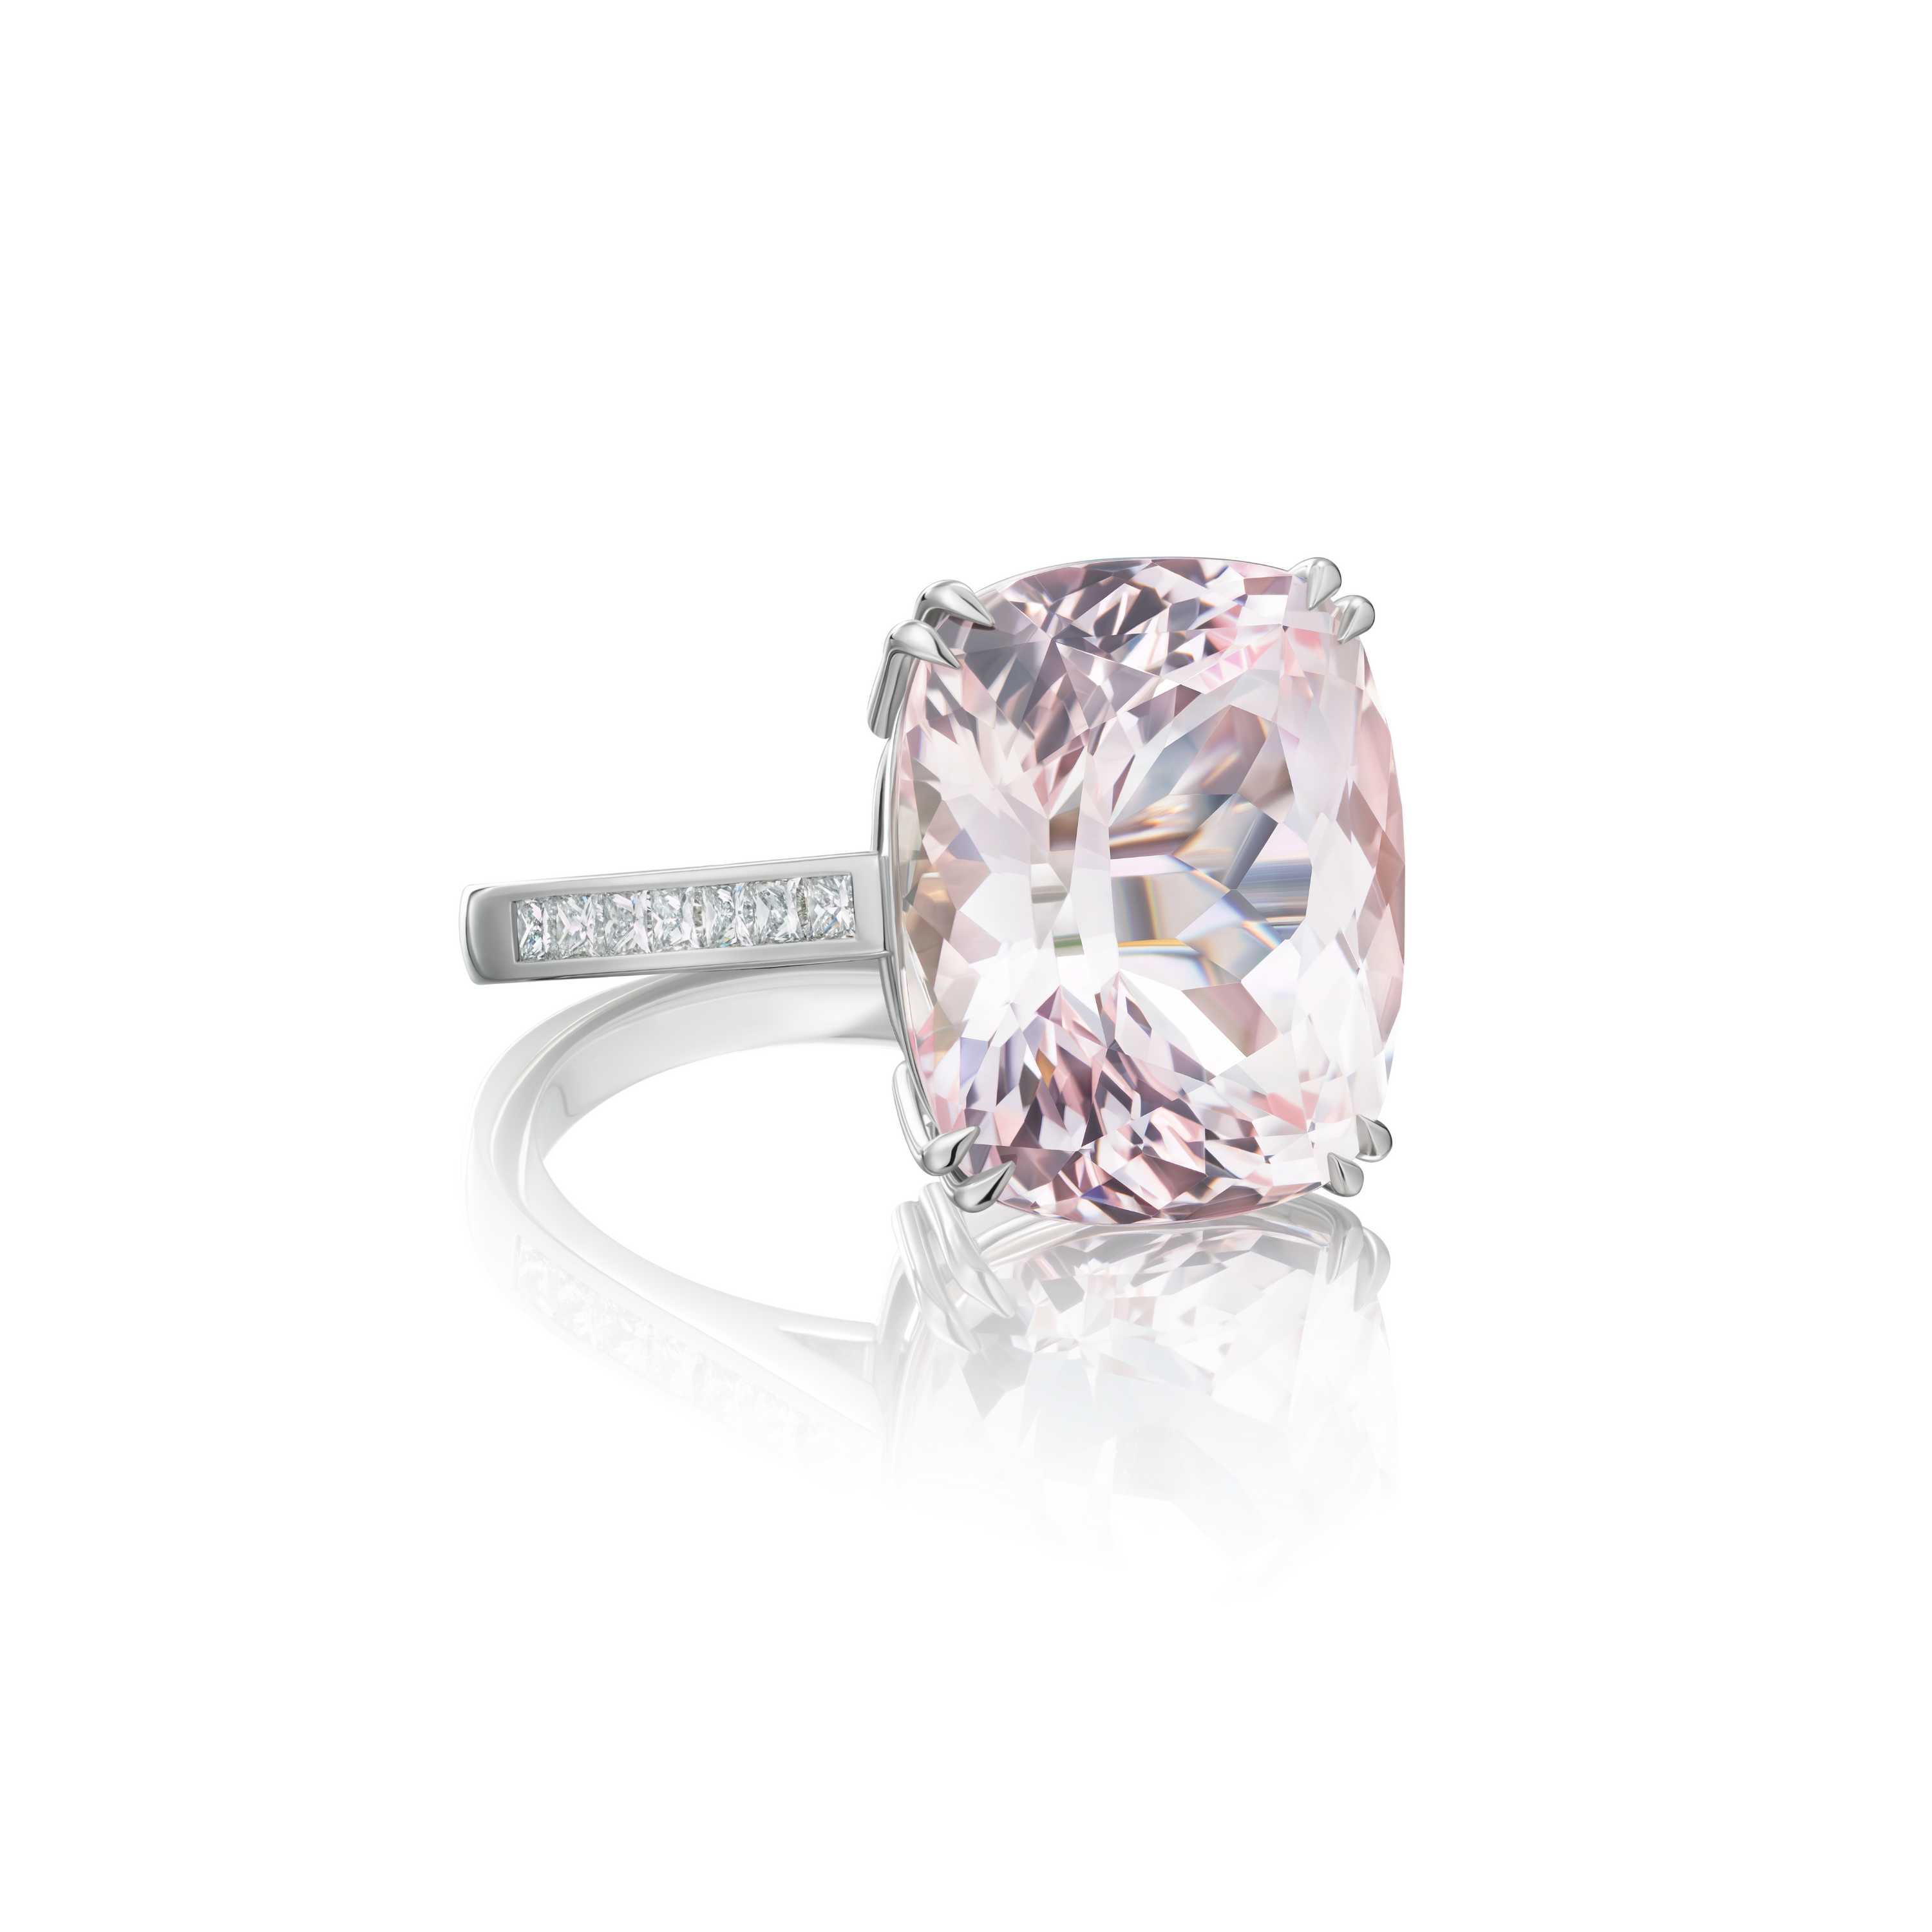 8.79cts Morganite Ring With Diamond Set Shoulders